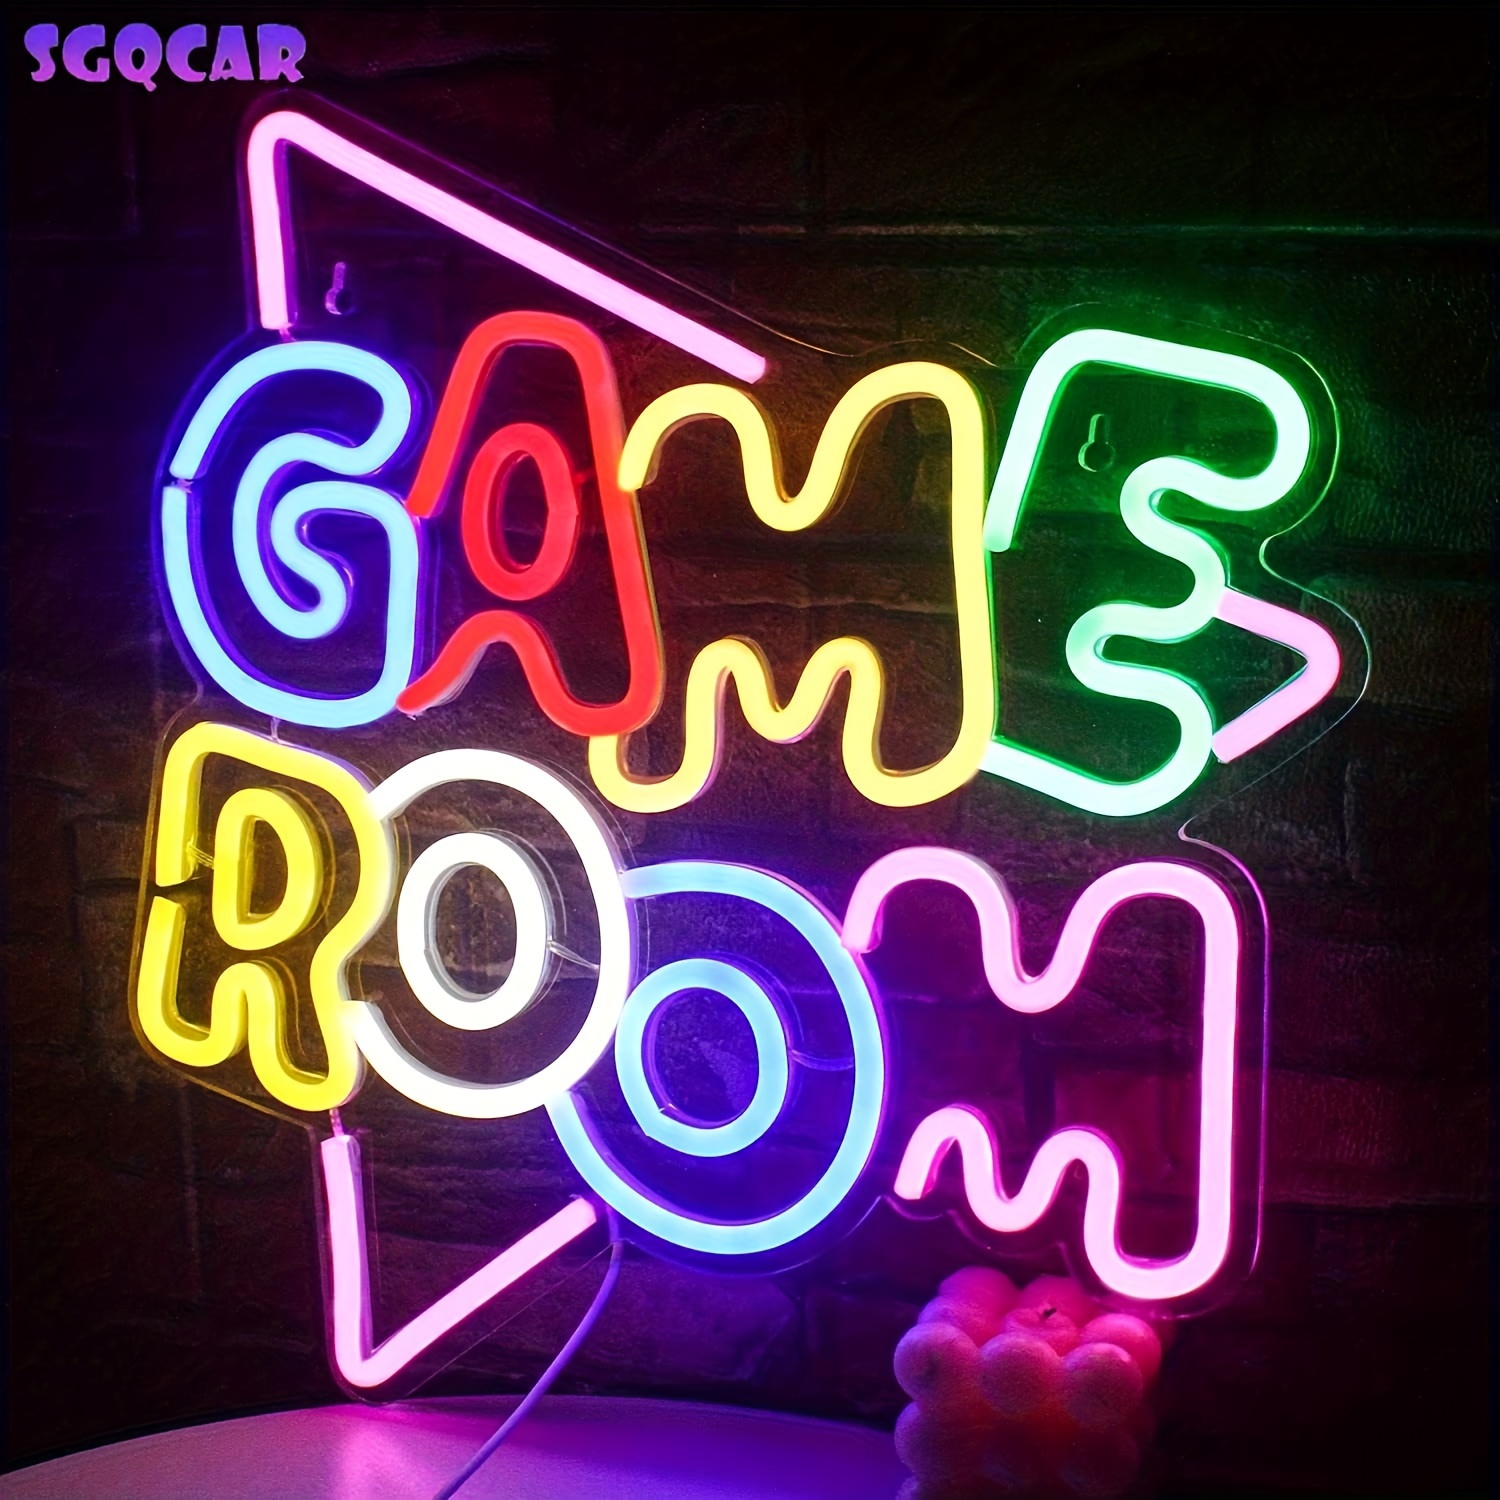 Larger Game Controller Neon Sign, Acrylic Board Neon Sign for Gamer Room  Decor, Game Zone LED Signs for Teen Boy Room Wall Decor, Best Gamer Gifts  for